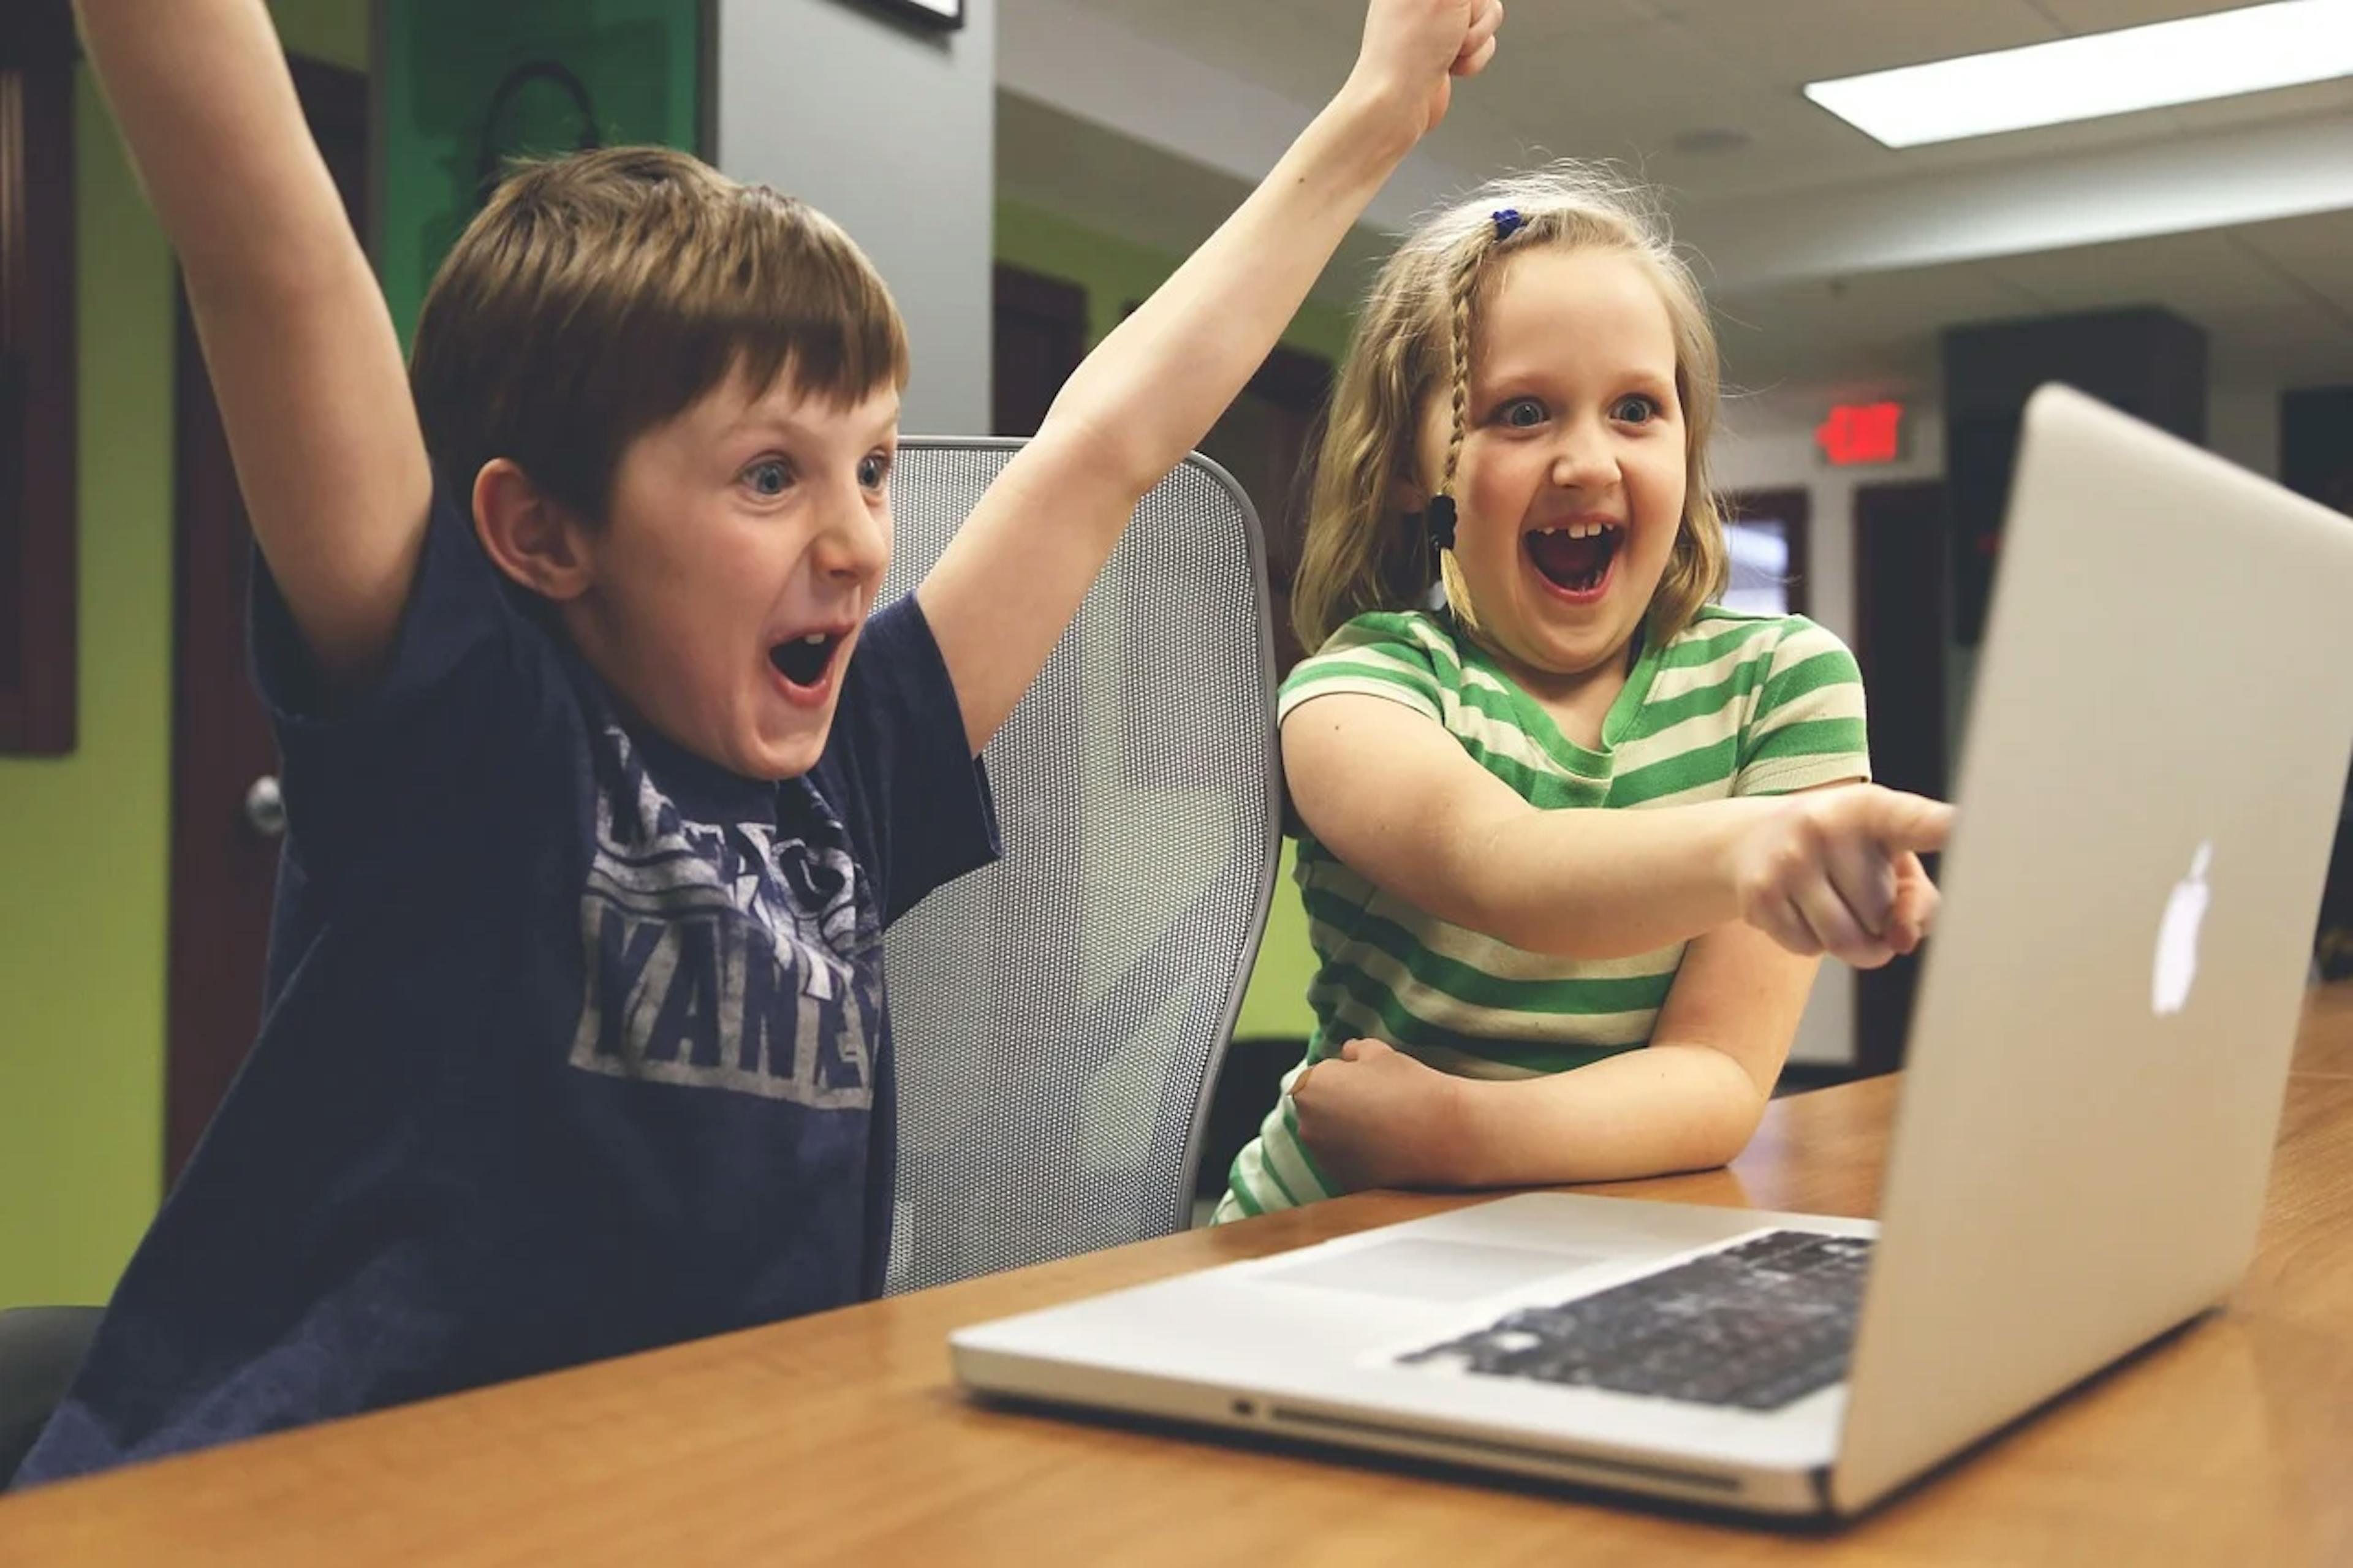 I wish I could feel the joy of gaming like these kids. Source: Pixabay